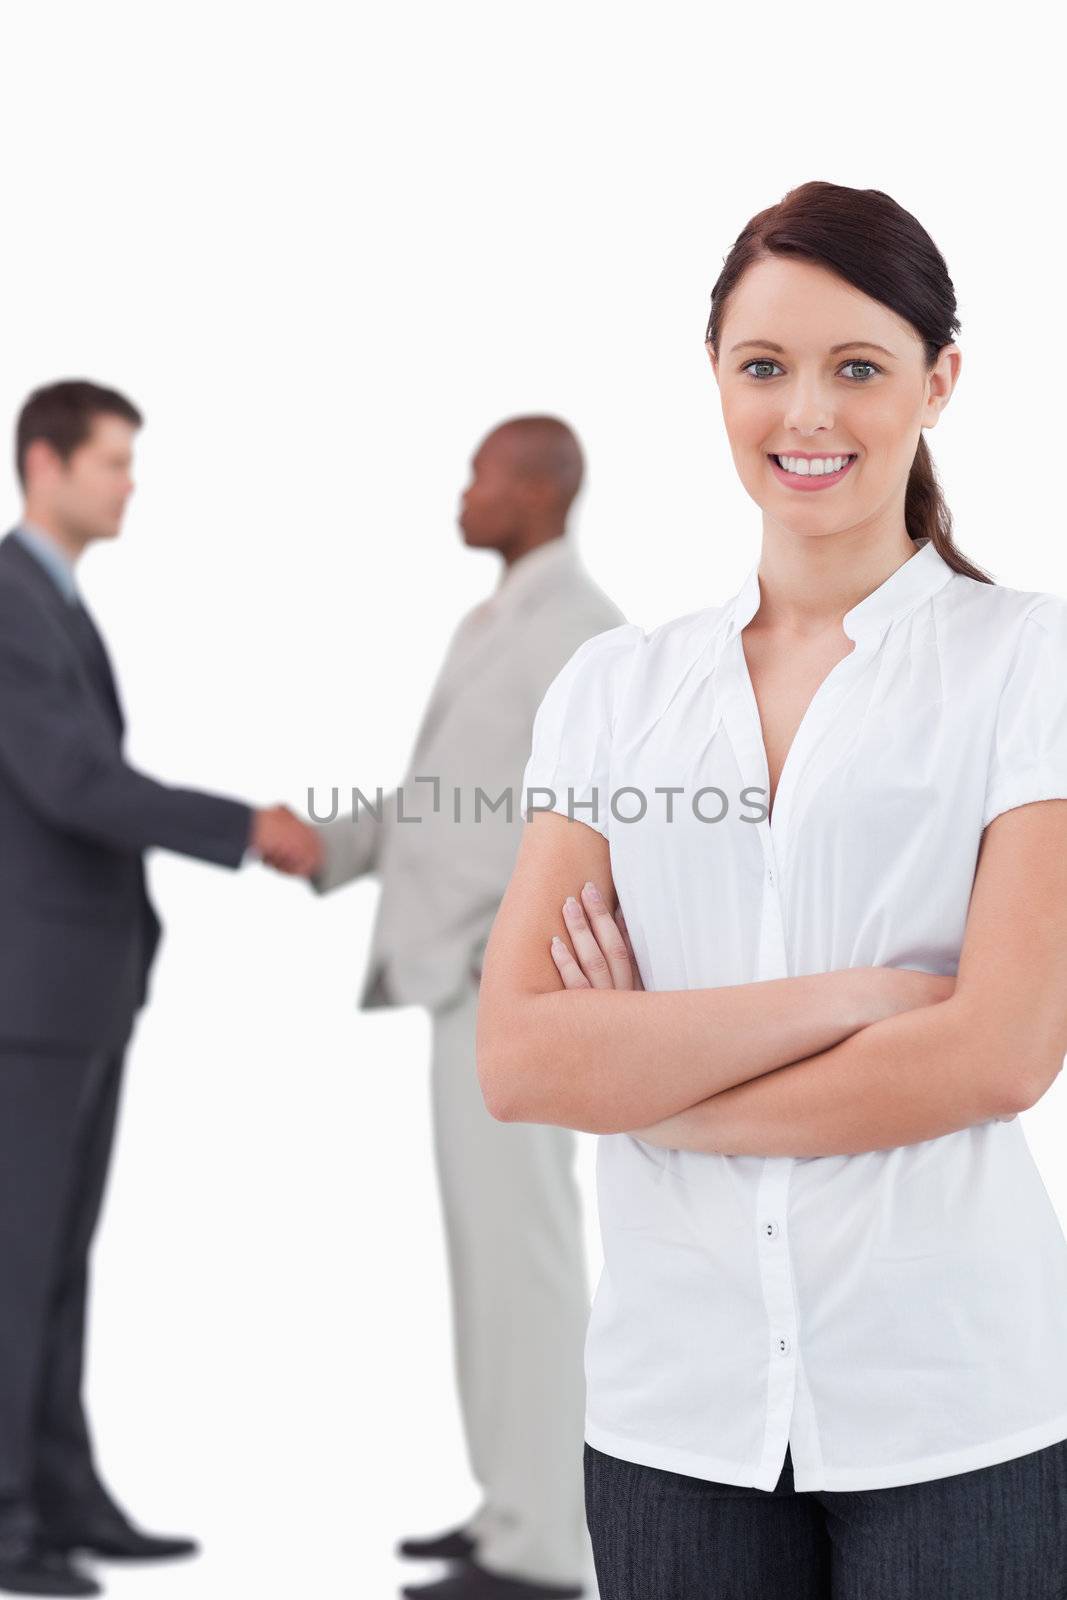 Tradeswoman with arms folded and hand shaking trading partners behind her against a white background